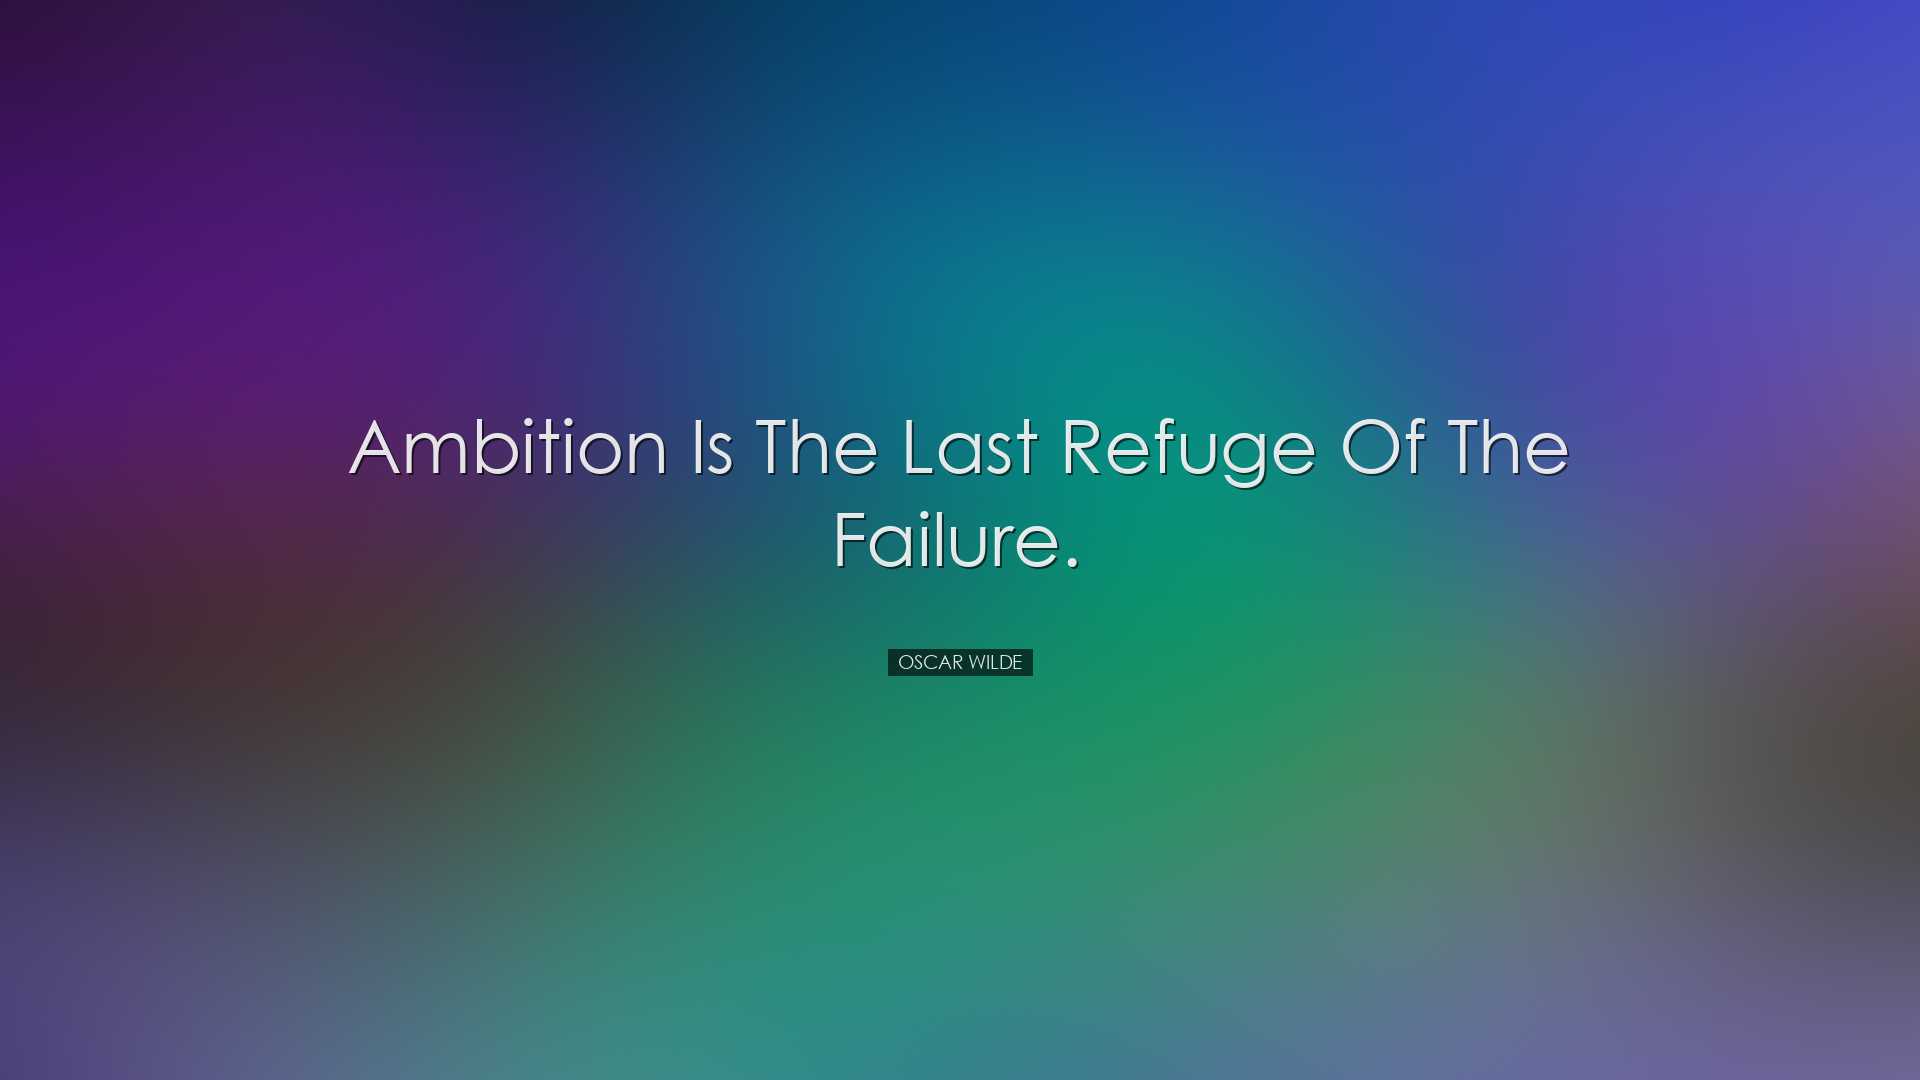 Ambition is the last refuge of the failure. - Oscar Wilde